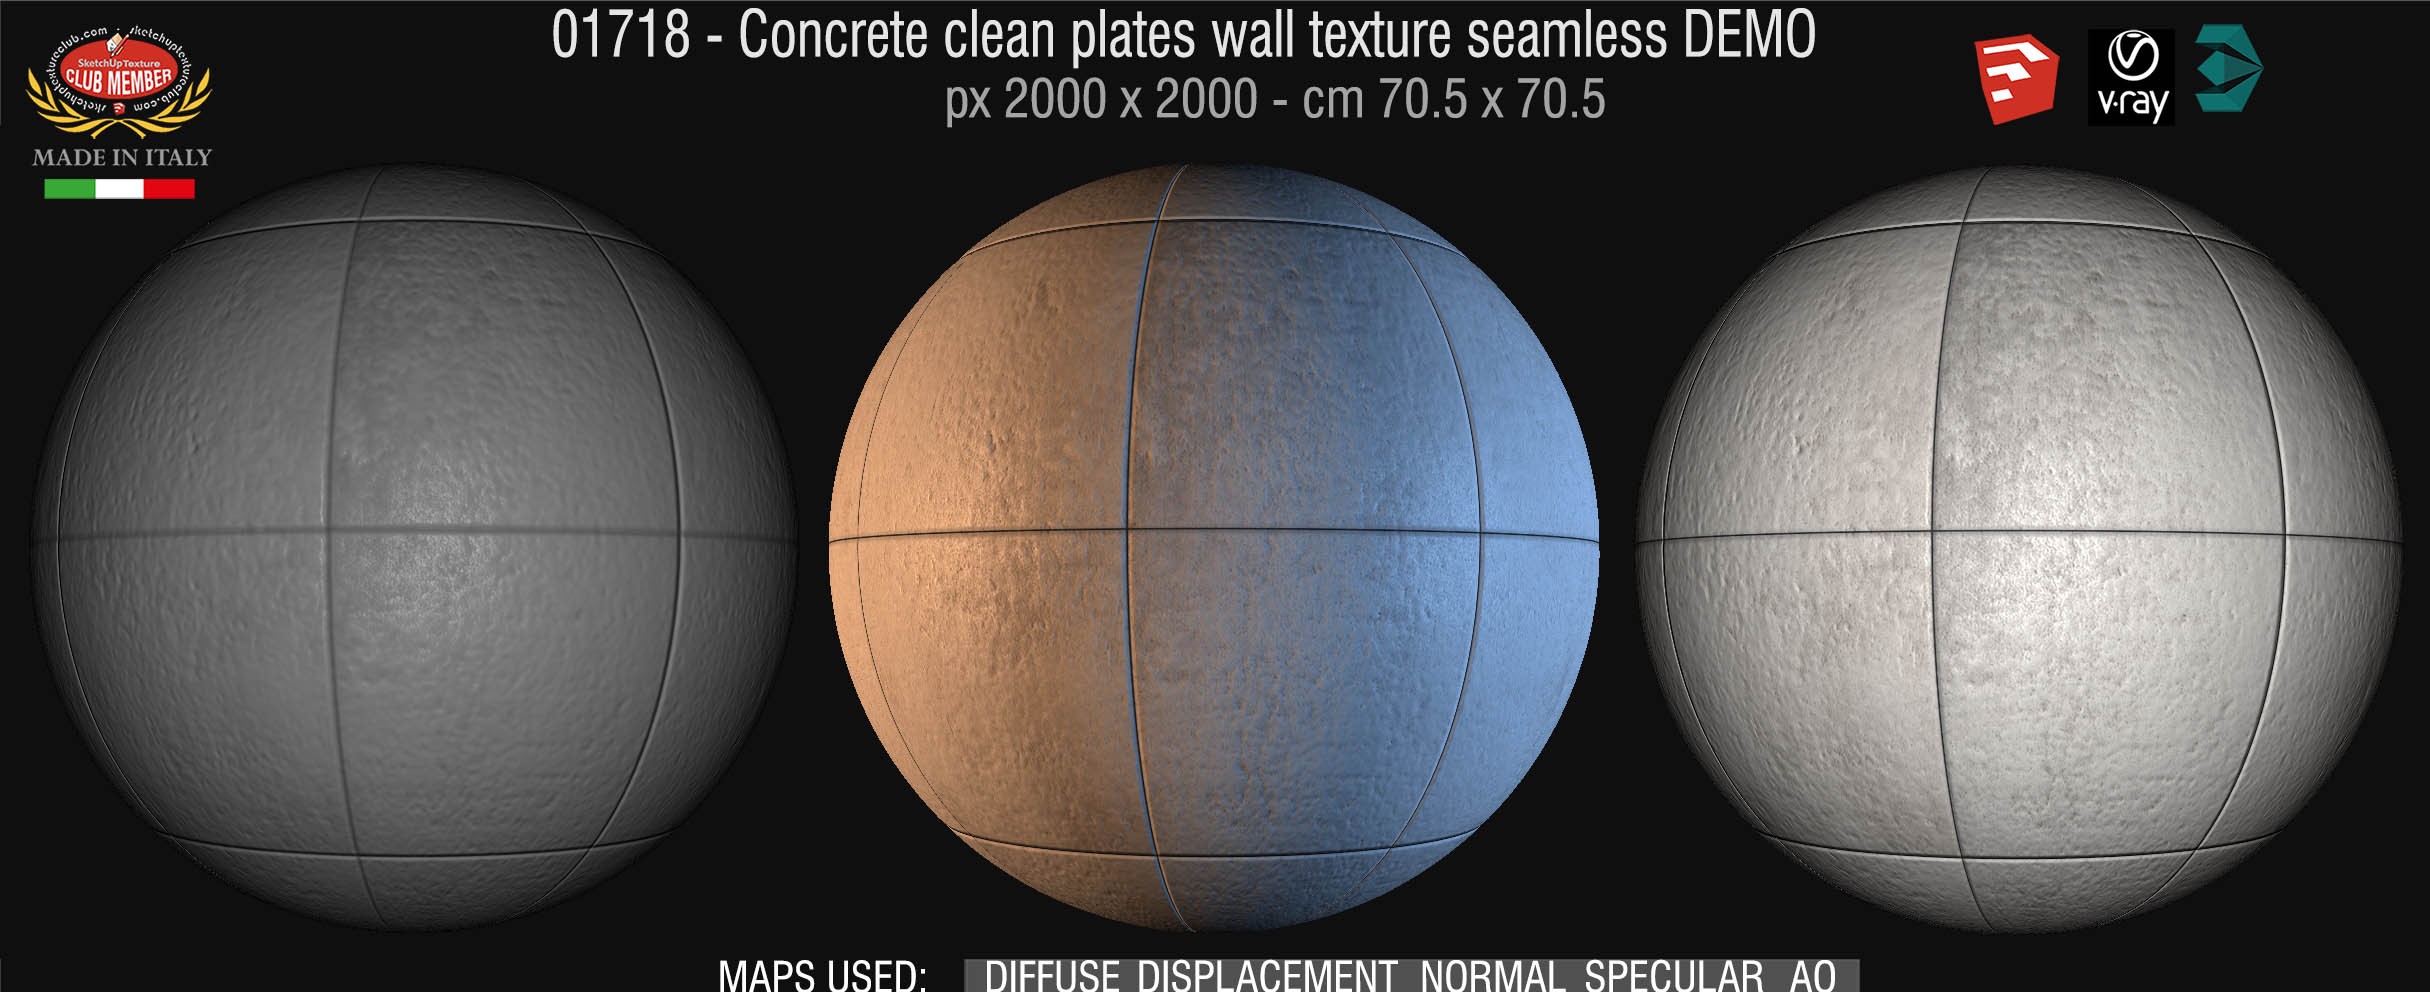 01718 Concrete clean plates wall texture seamless + maps DEMO